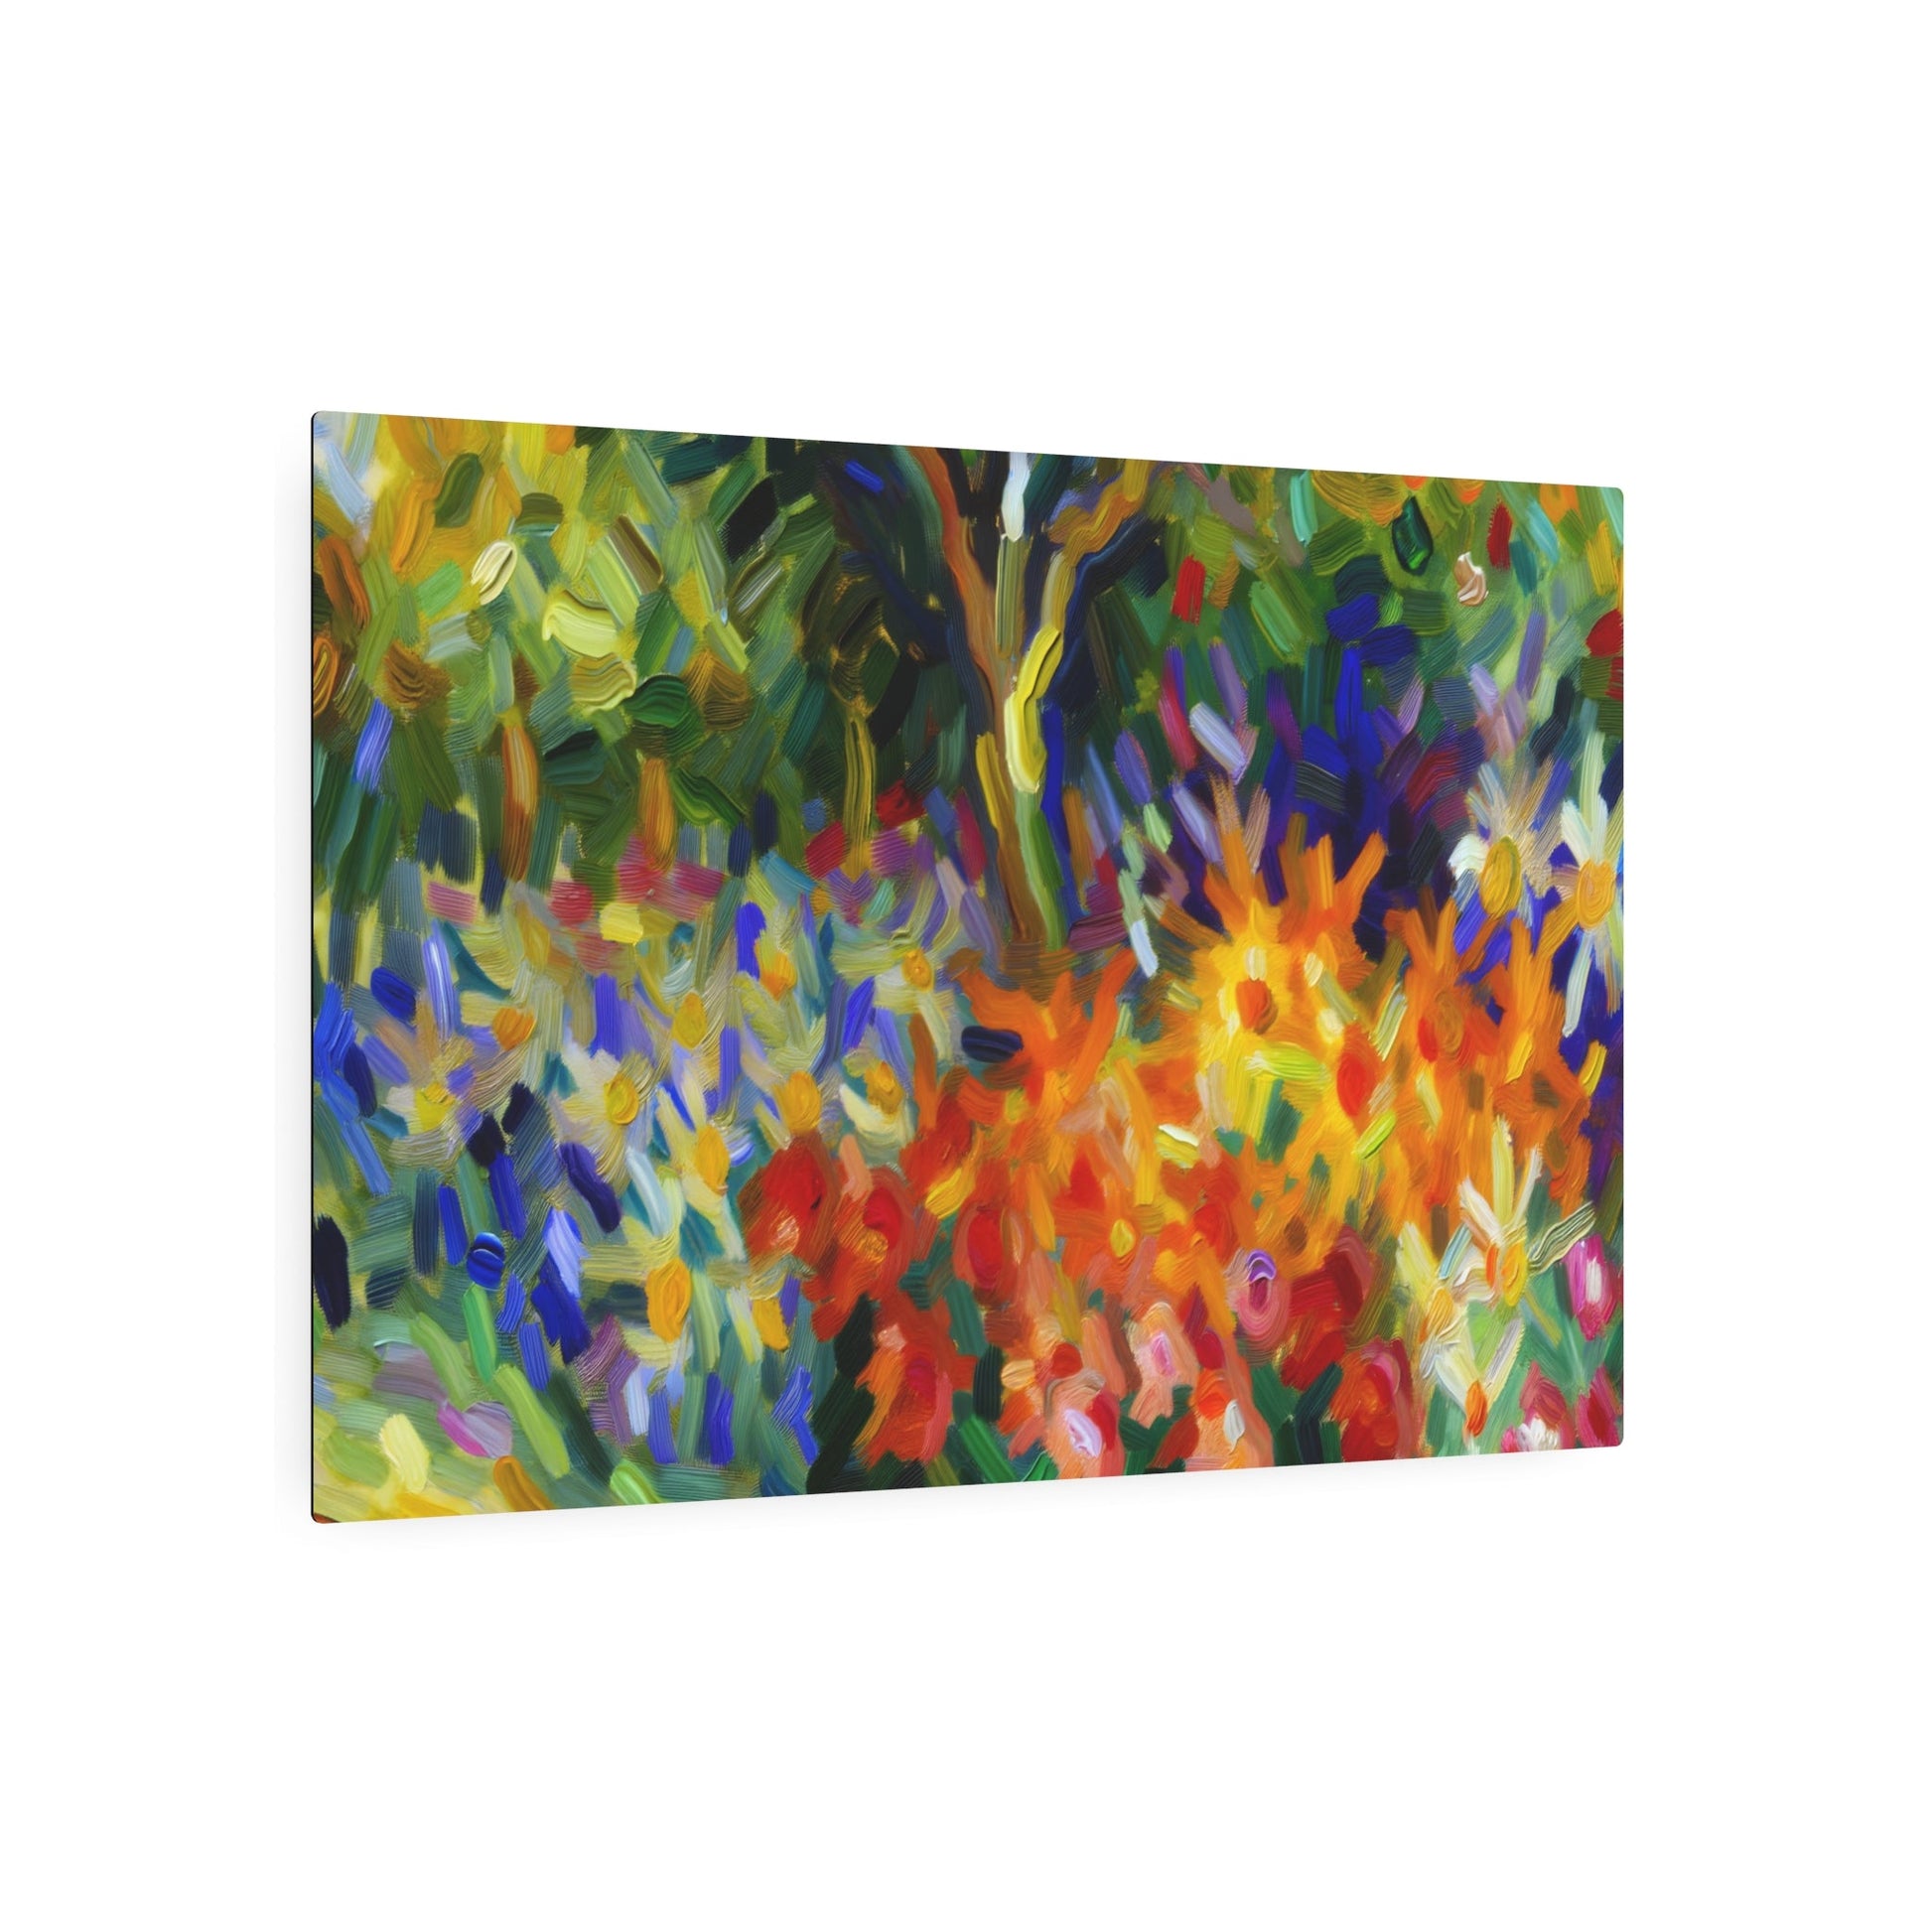 Metal Poster Art | "Expressionistic Western Art Styles: Dramatic, Color-Intensified Garden Flowers - Vivid & Emotional Masterpiece" - Metal Poster Art 36″ x 24″ (Horizontal) 0.12''